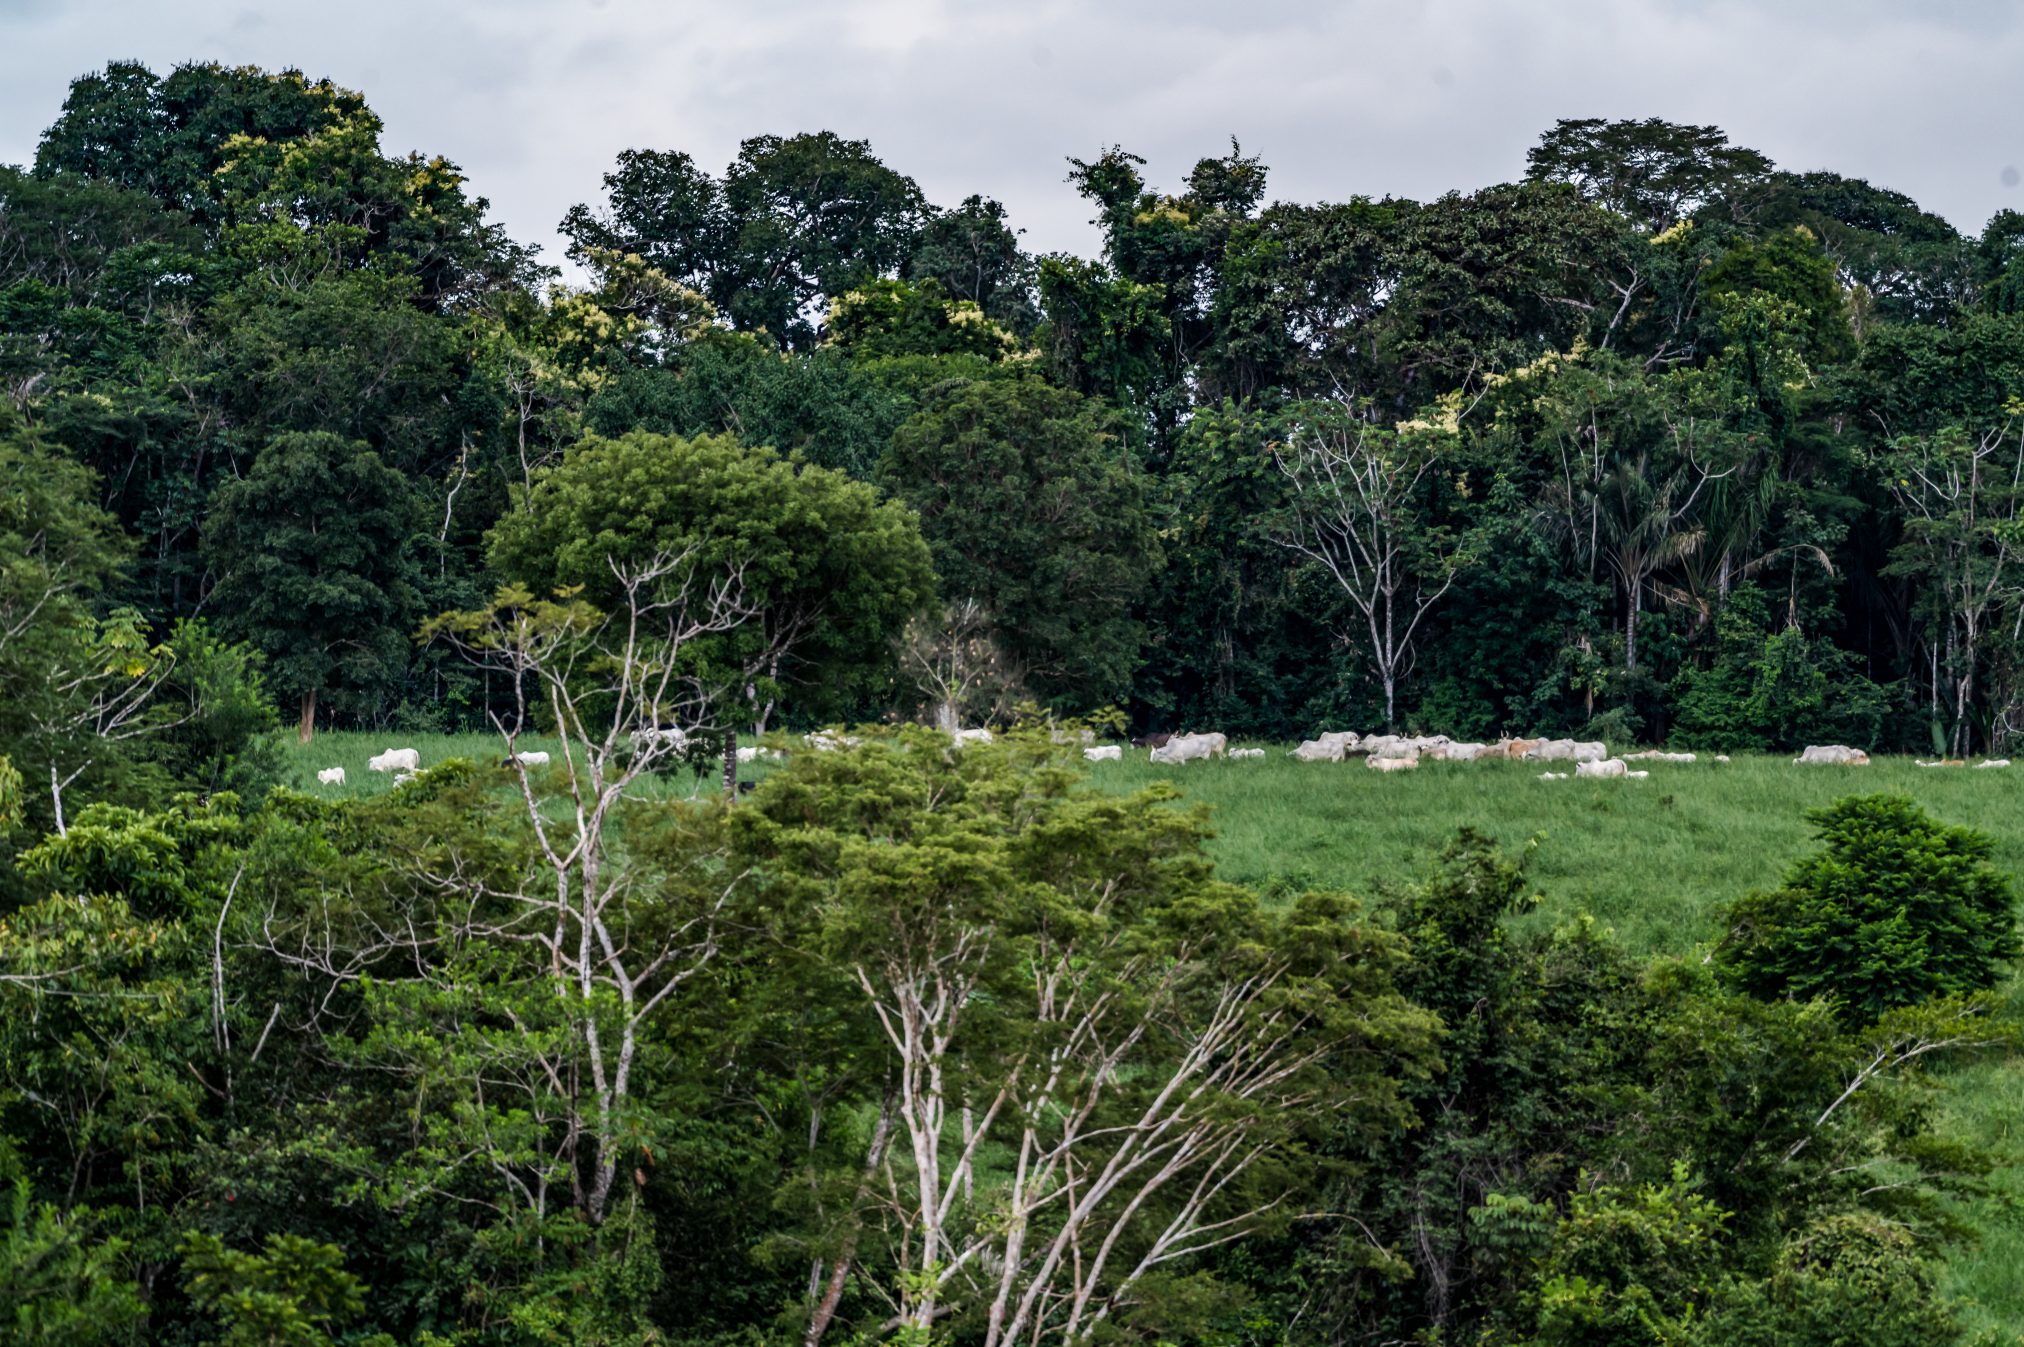 Cattle in the forest frontier of Mato Grosso